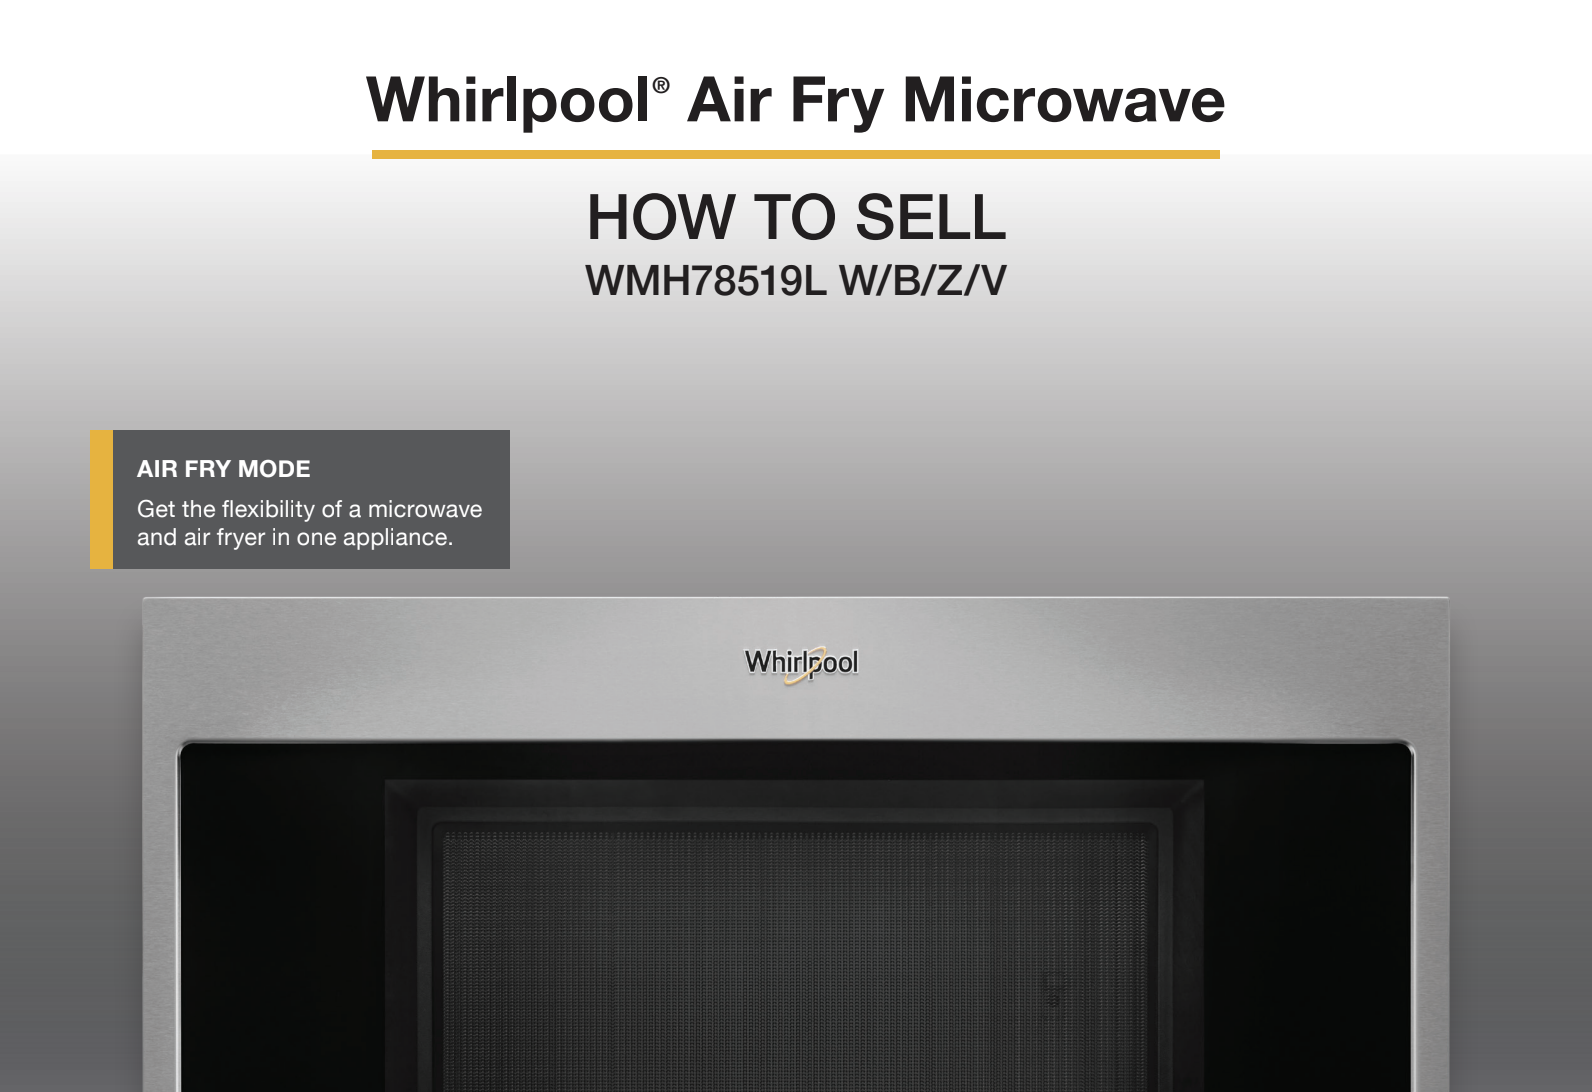 How to sell the Whirlpool® Air Fry MHC